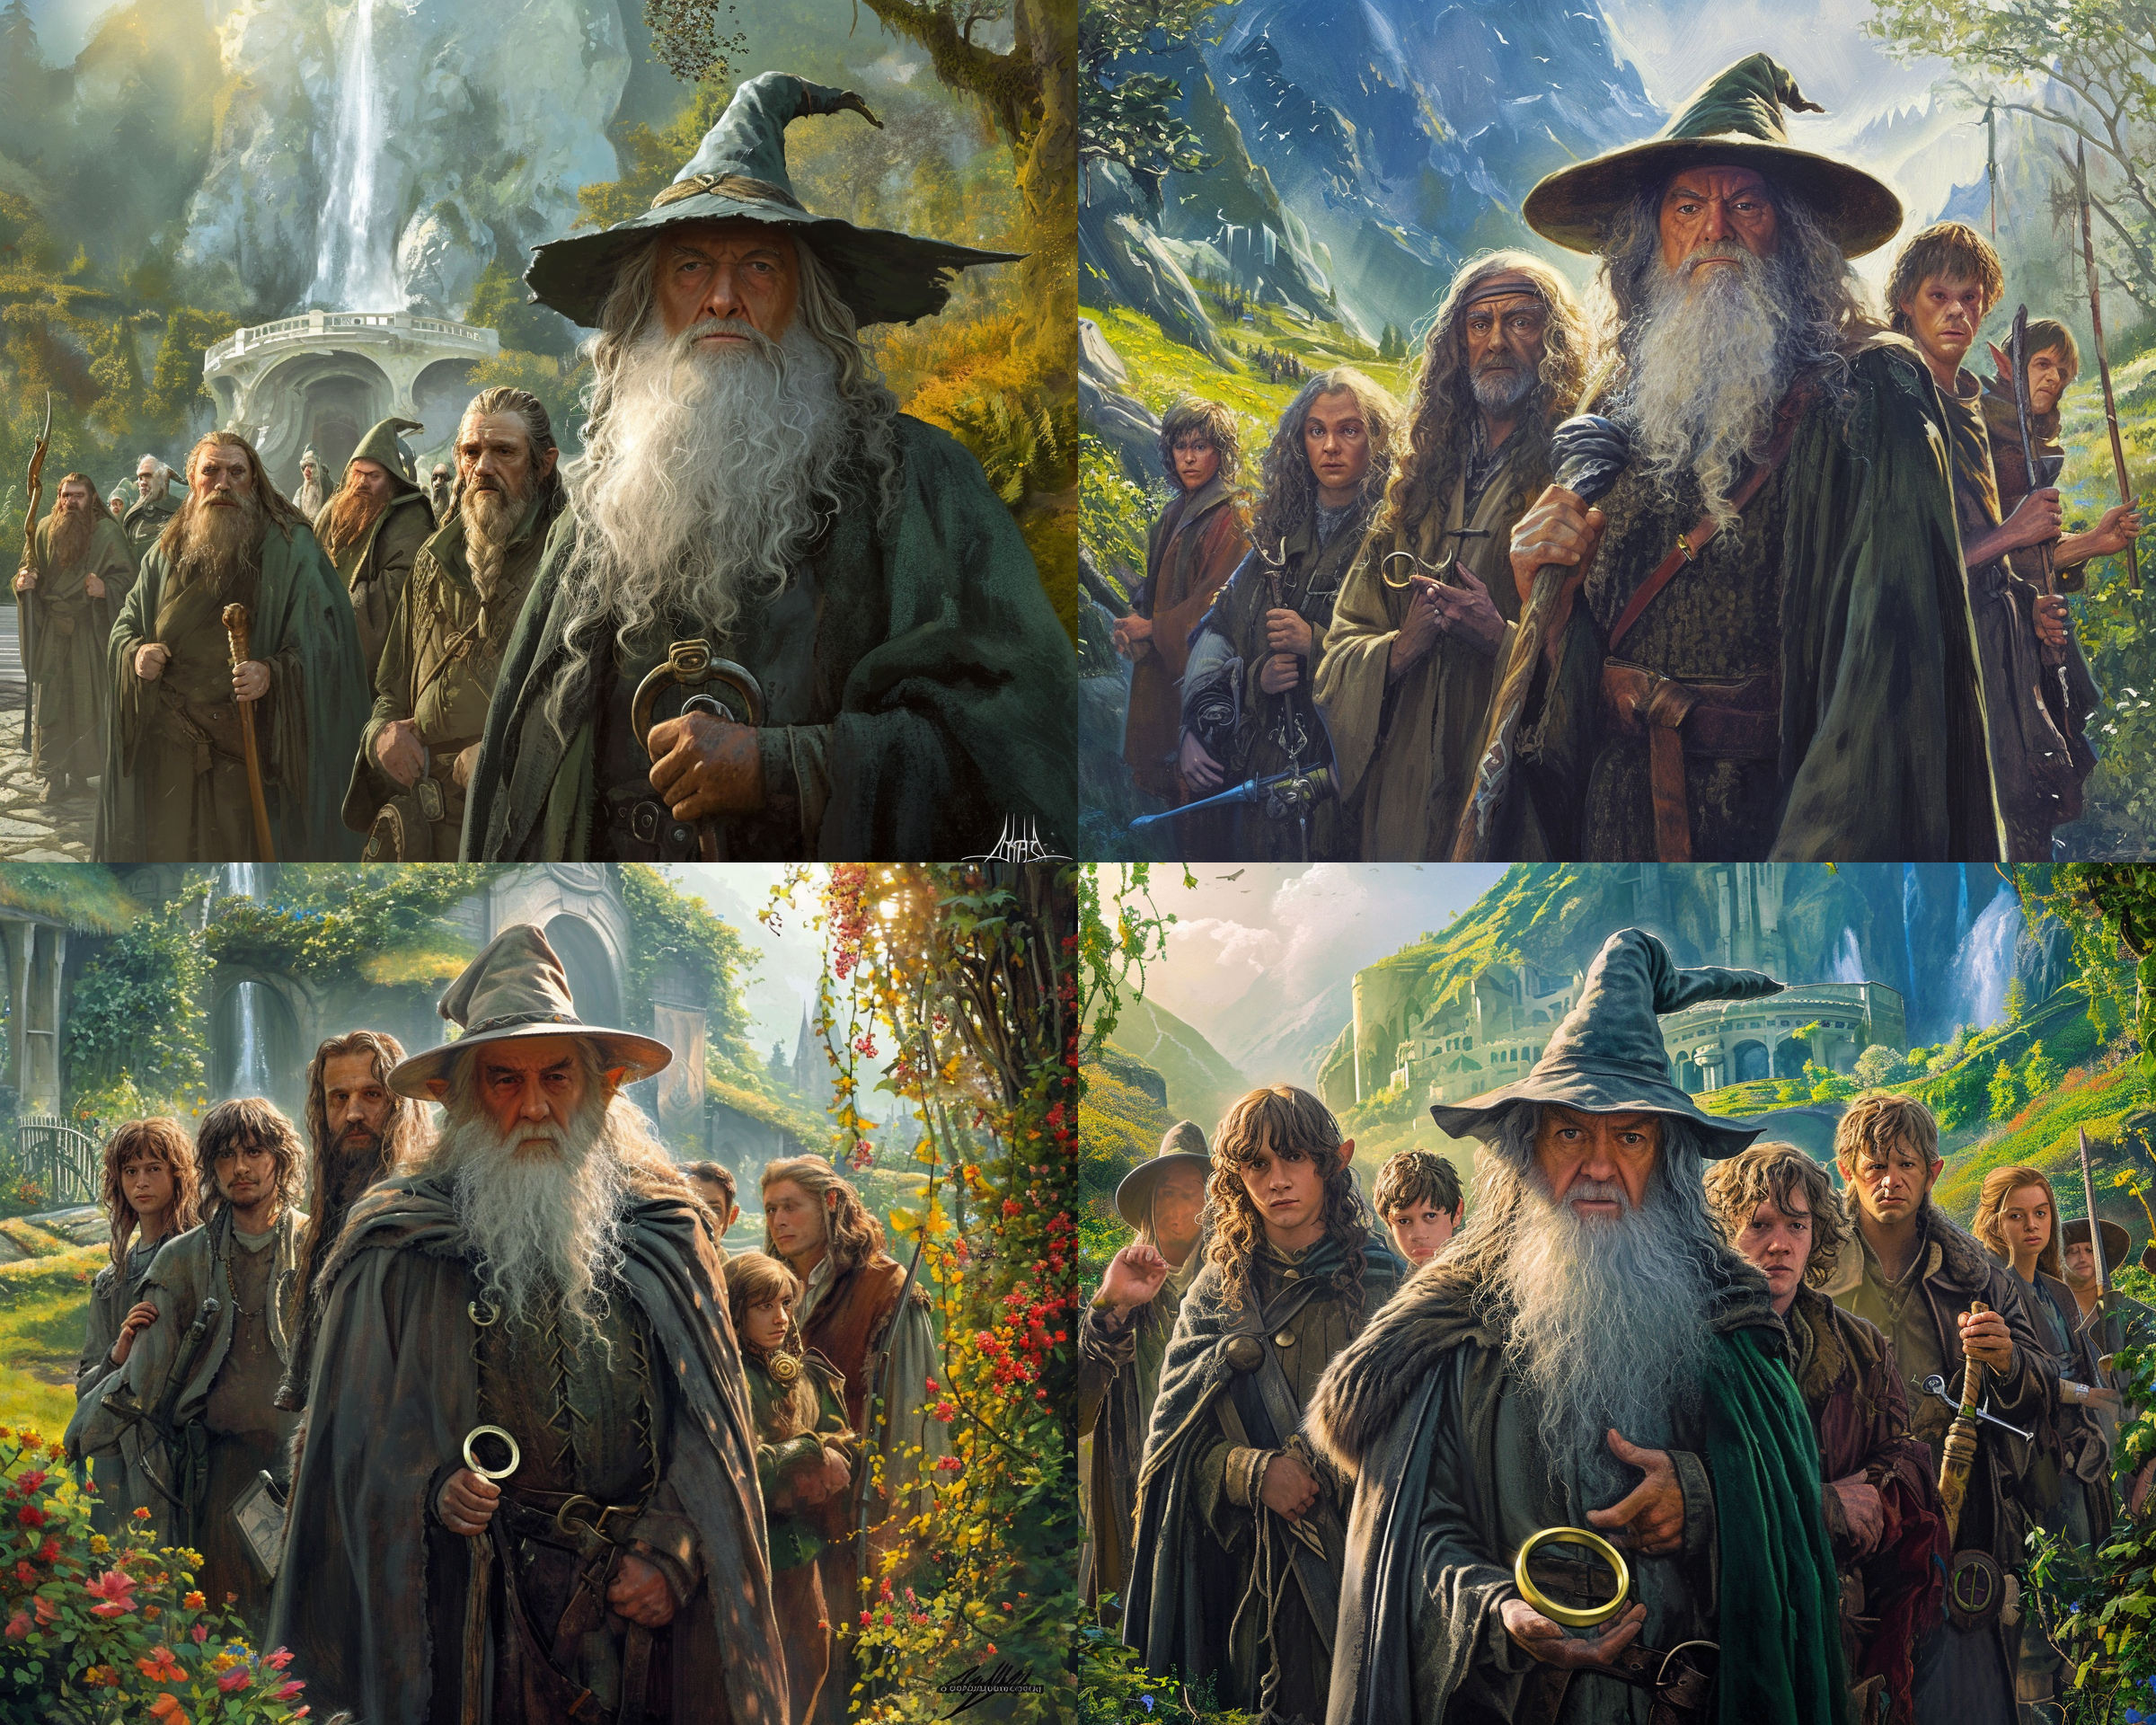 Visualising “The formation of the Fellowship of the Ring”